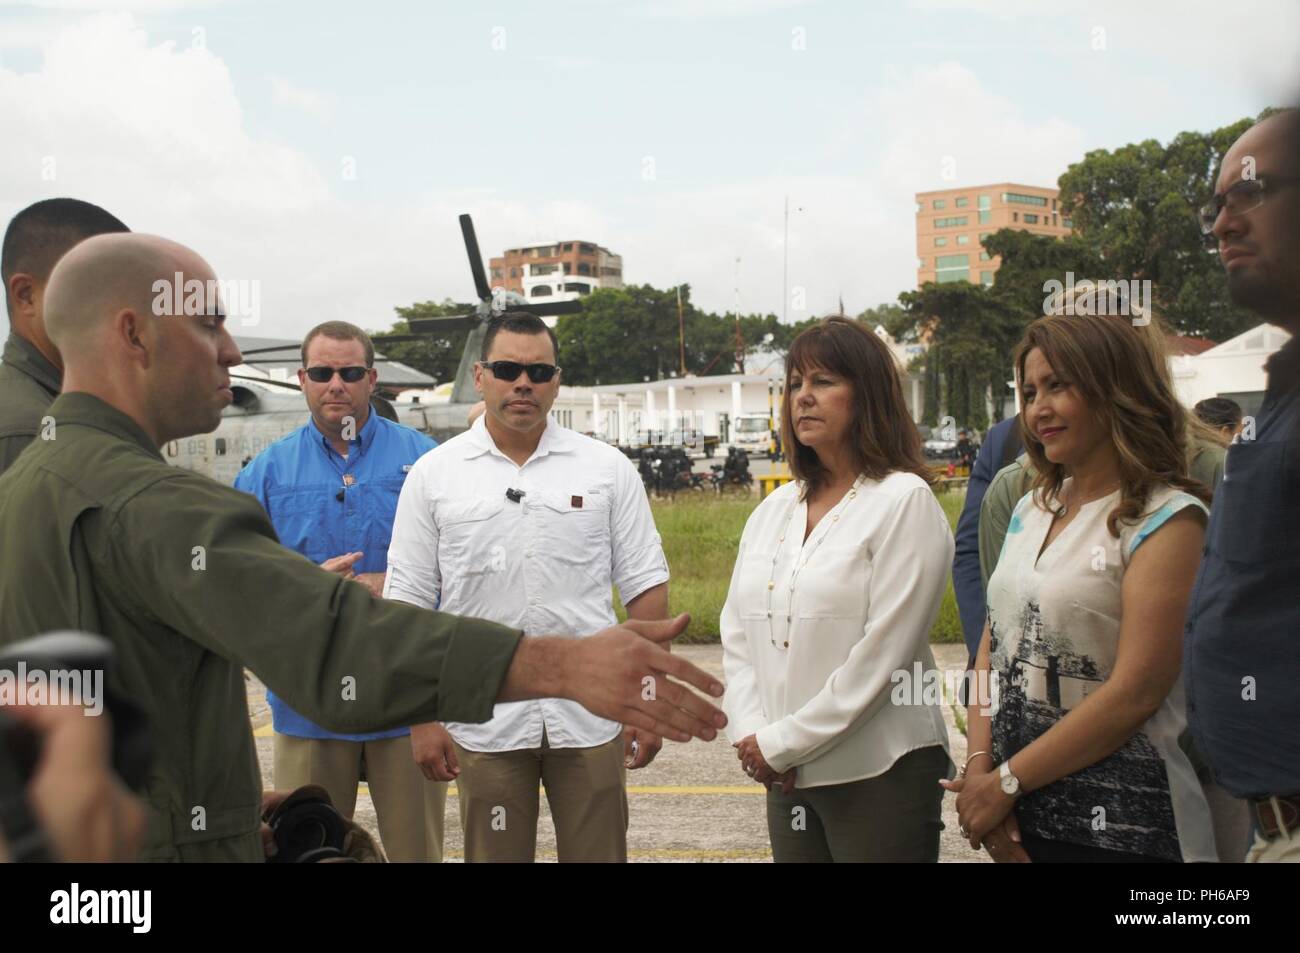 U.S. second lady Karen Pence, left, and Guatemalan first lady Patricia Morales attend a pre-flight brief before boarding a CH-53E Super Stallion helicopter belonging to Special Purpose Marine Air-Ground Task Force - Southern Command at La Aurora International Airport in Guatemala City, Guatemala, June 28, 2018. Pence flew with Morales to visit La Escuintla, an area damaged by volcanic eruptions by Fuego Volcano. Pence and her staff delivered care packages to families and assessed the total damage caused by the volcano that has affected the lives of millions in the area. The Marines and sailors Stock Photo